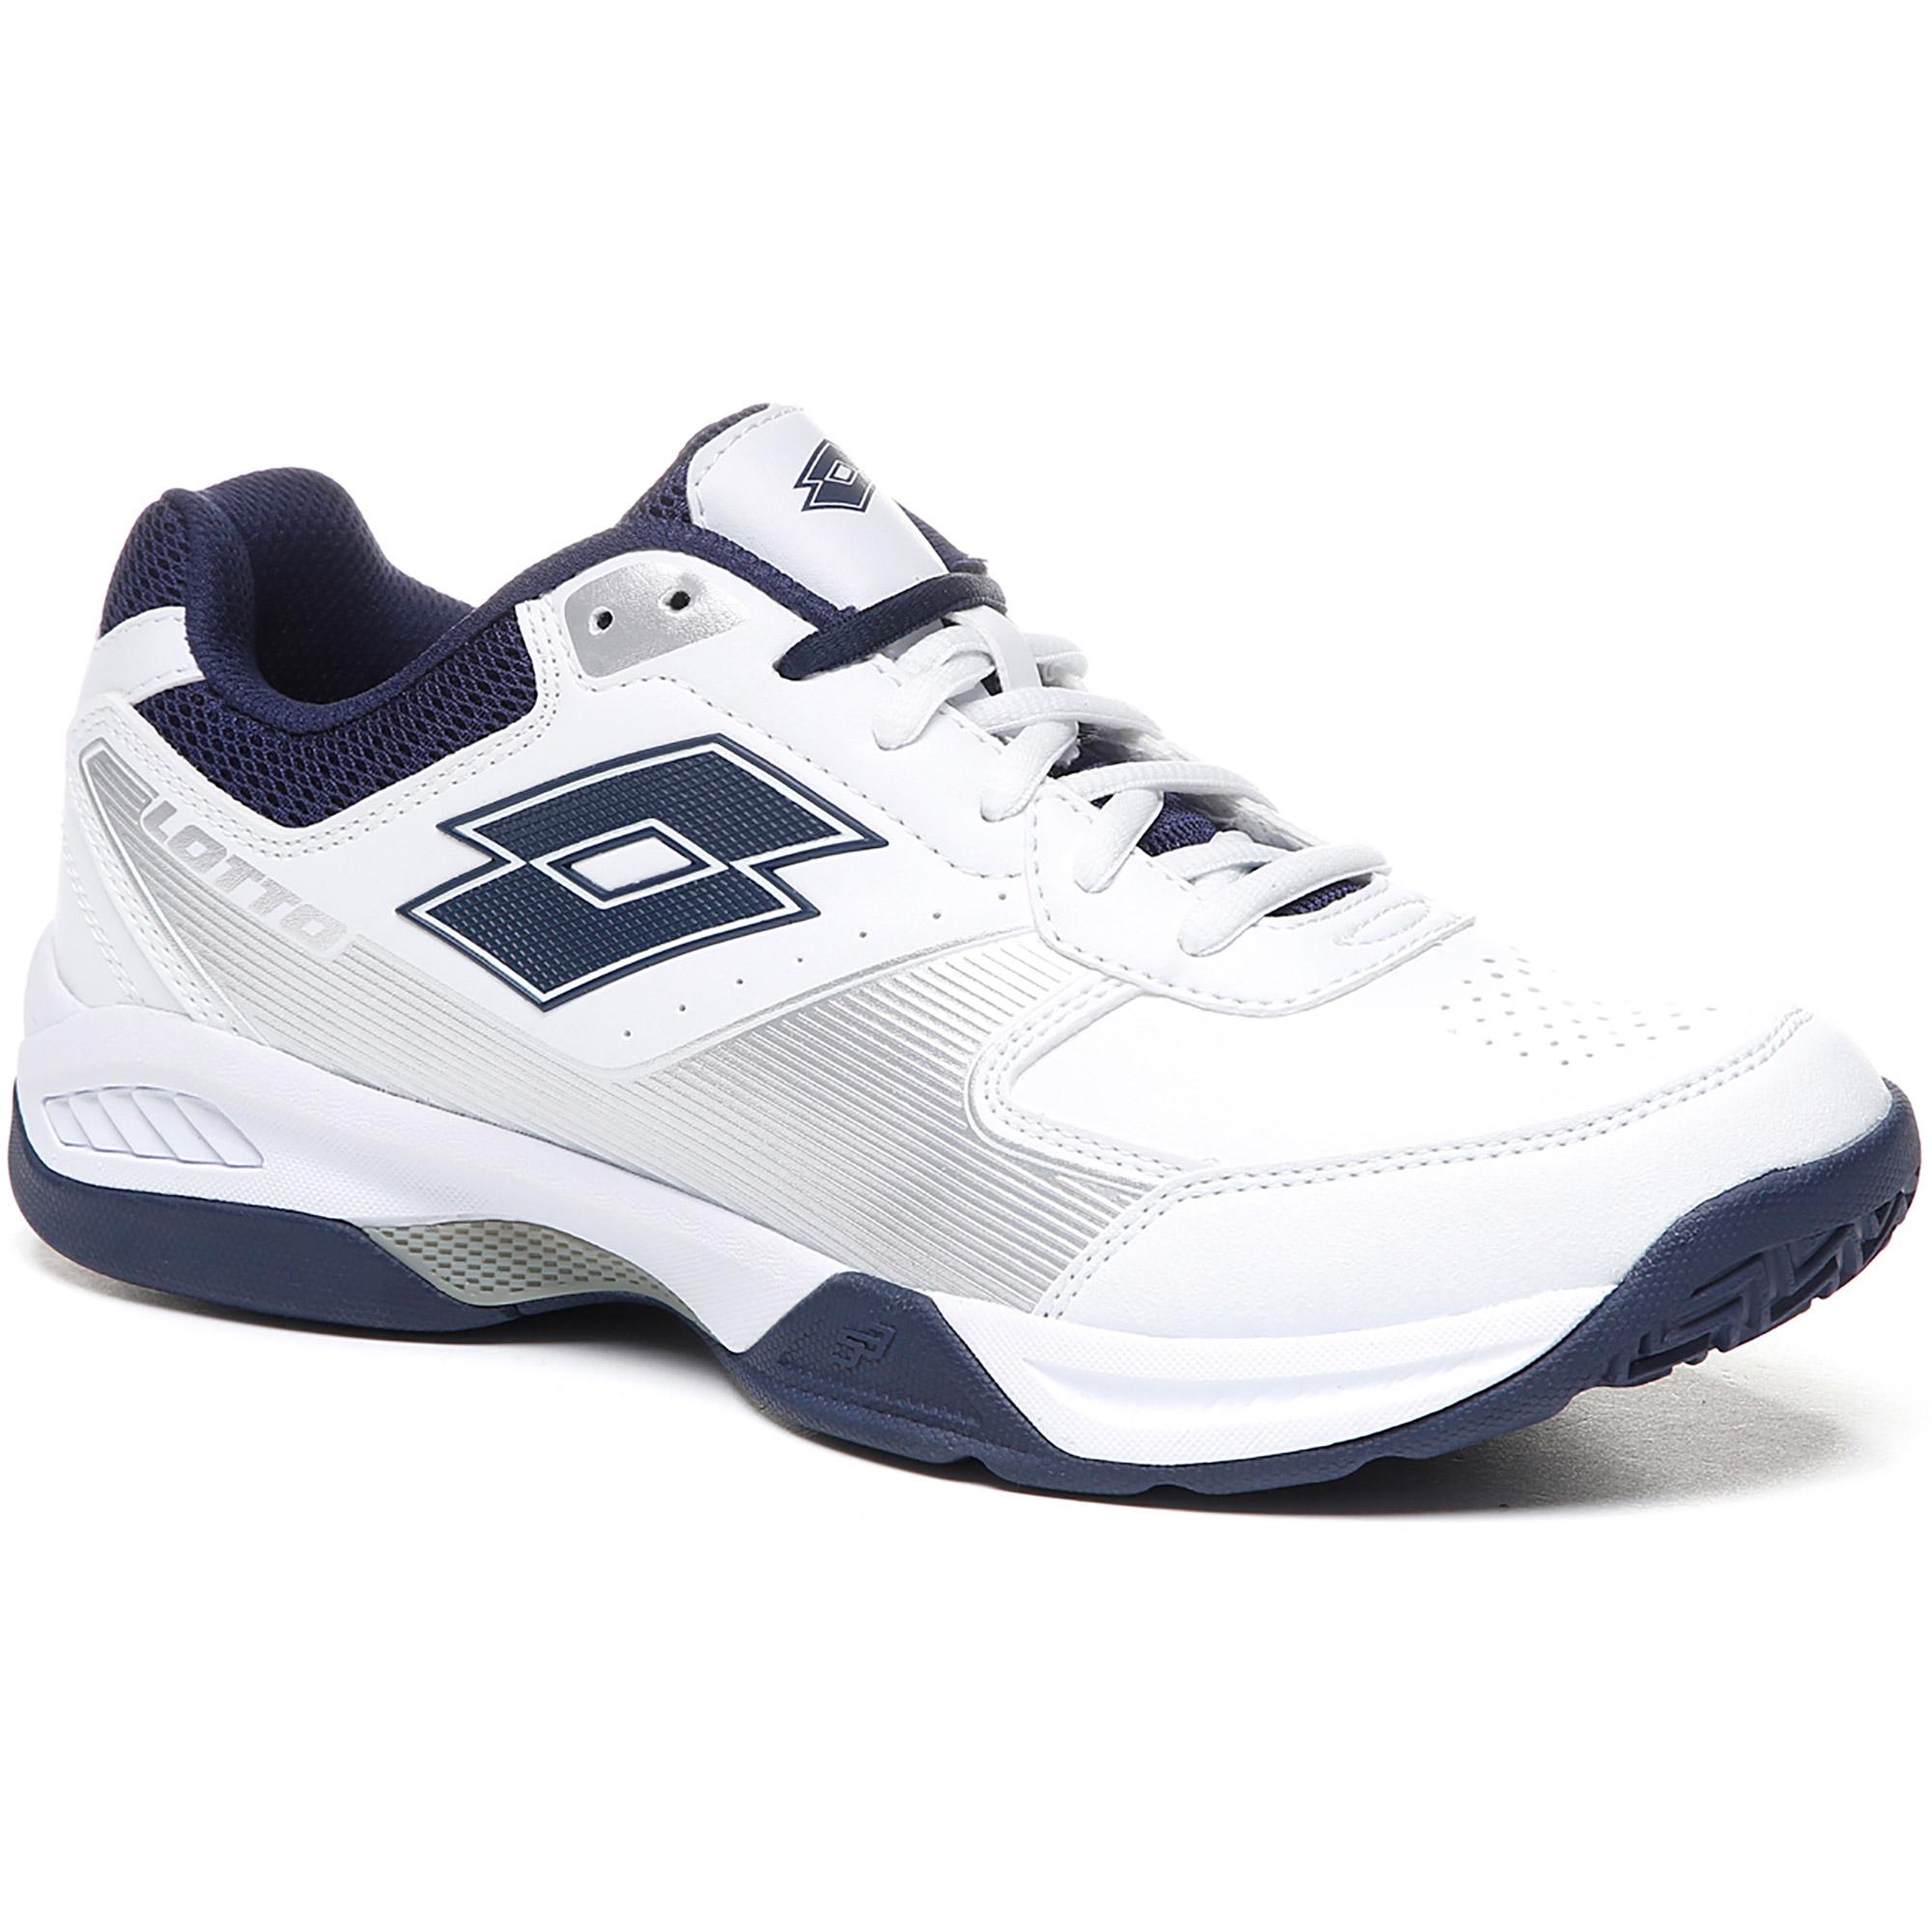 Lotto Mens Space 600 Air Tennis Shoes White/Navy Blue